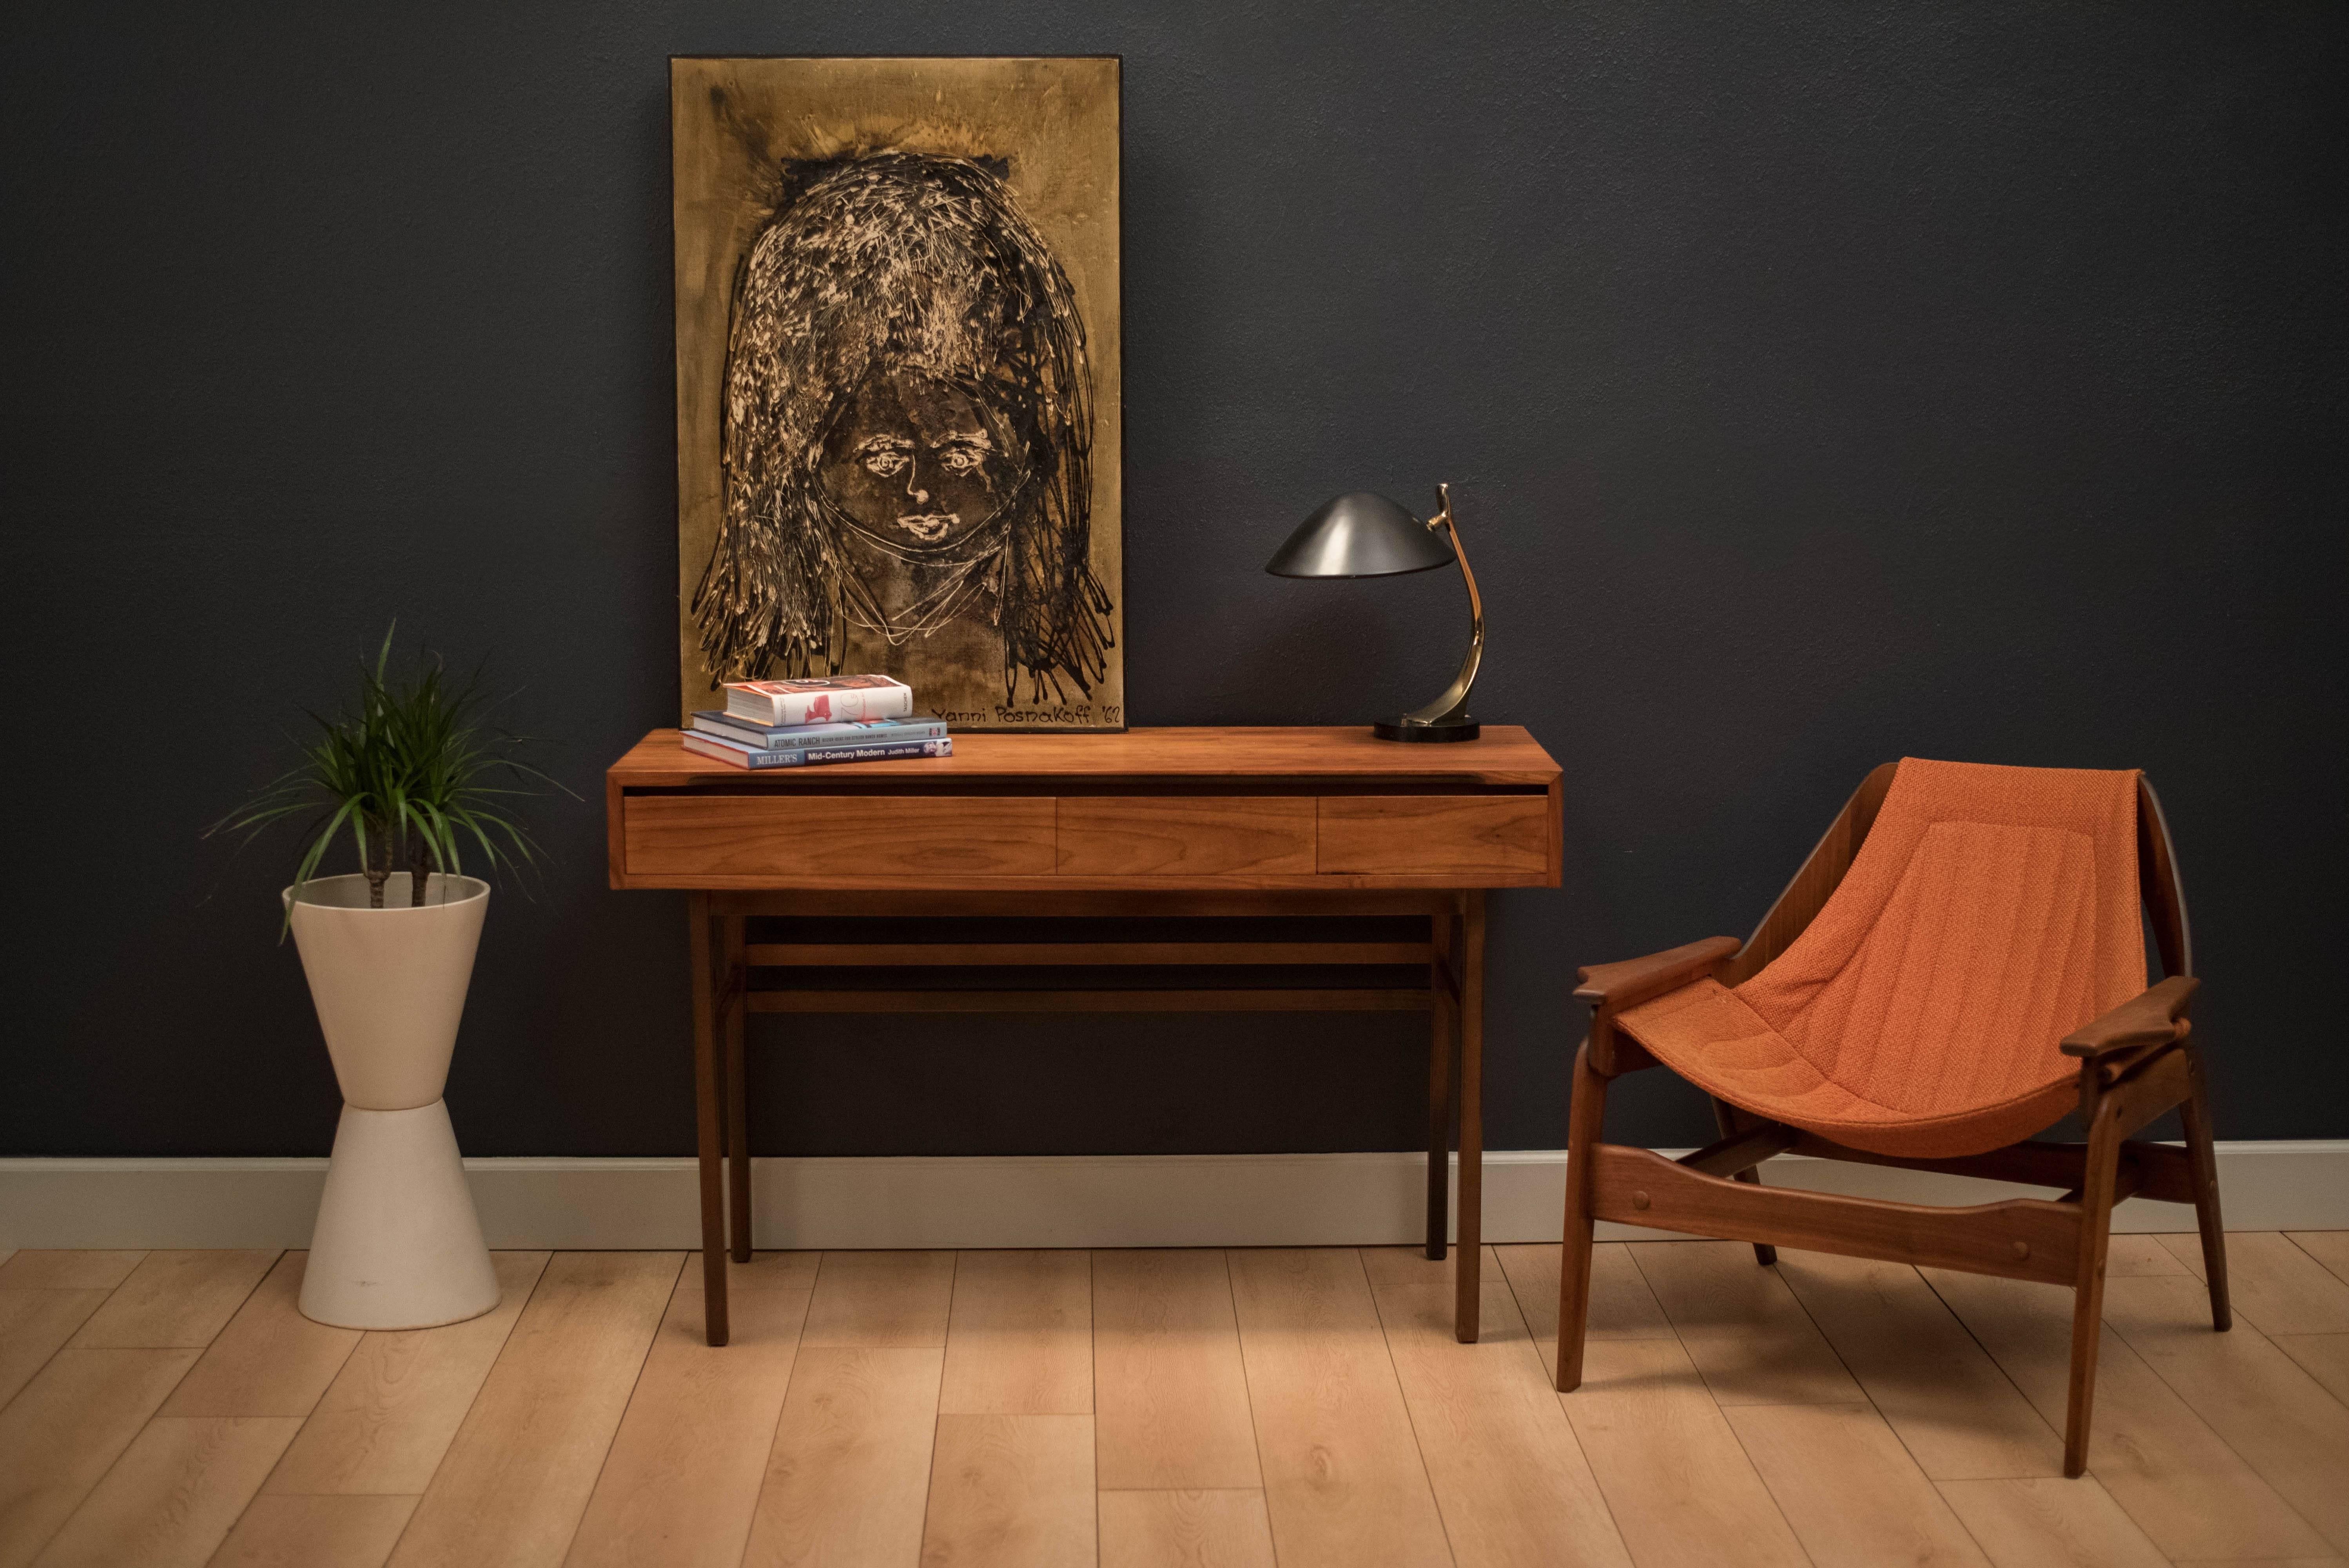 Mid-century walnut console table designed by Kipp Stewart and Stewart MacDougall for Glenn of California, circa 1960s. This versatile piece has three drawers and can also function as a desk.